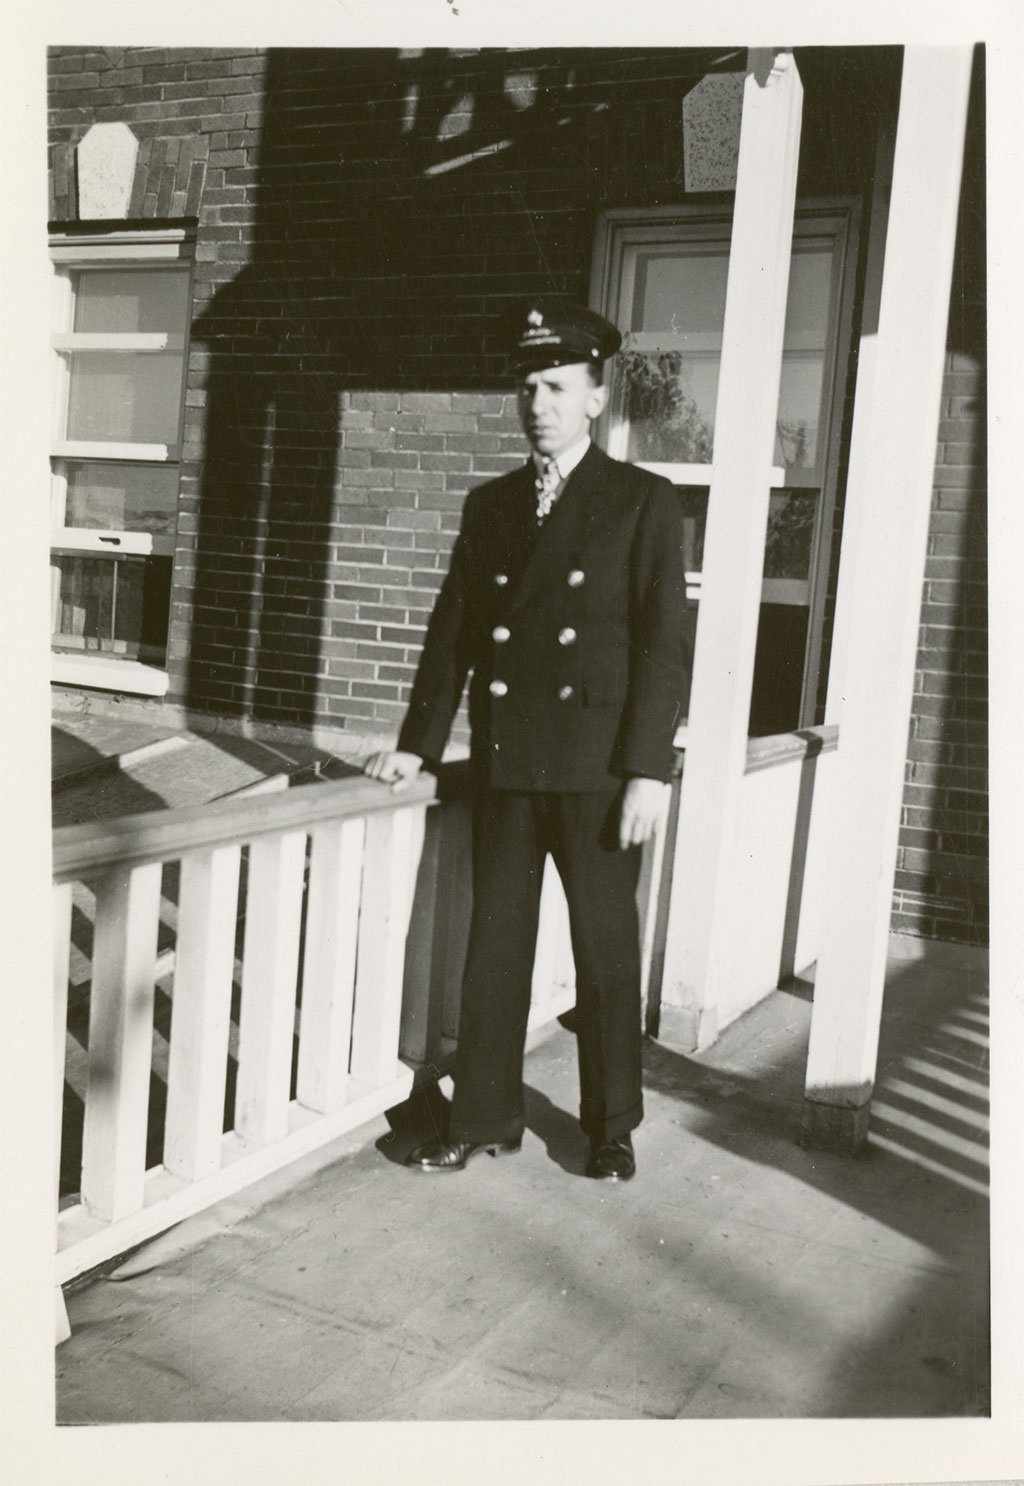 A man in hat and uniform stands with his hand on a wooden railing as he looks at the camera.